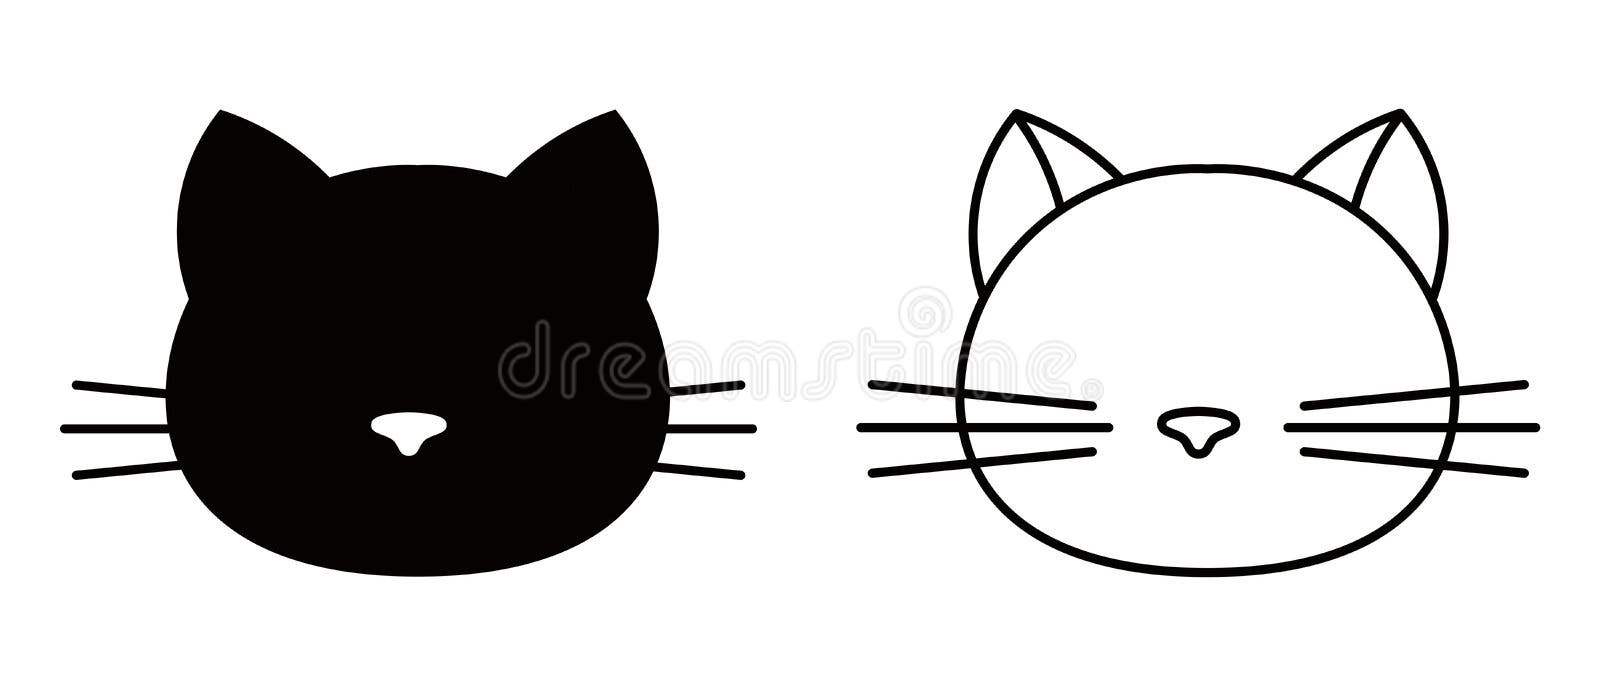 Two Cats Sitting Icon Design Template Stock Vector (Royalty Free